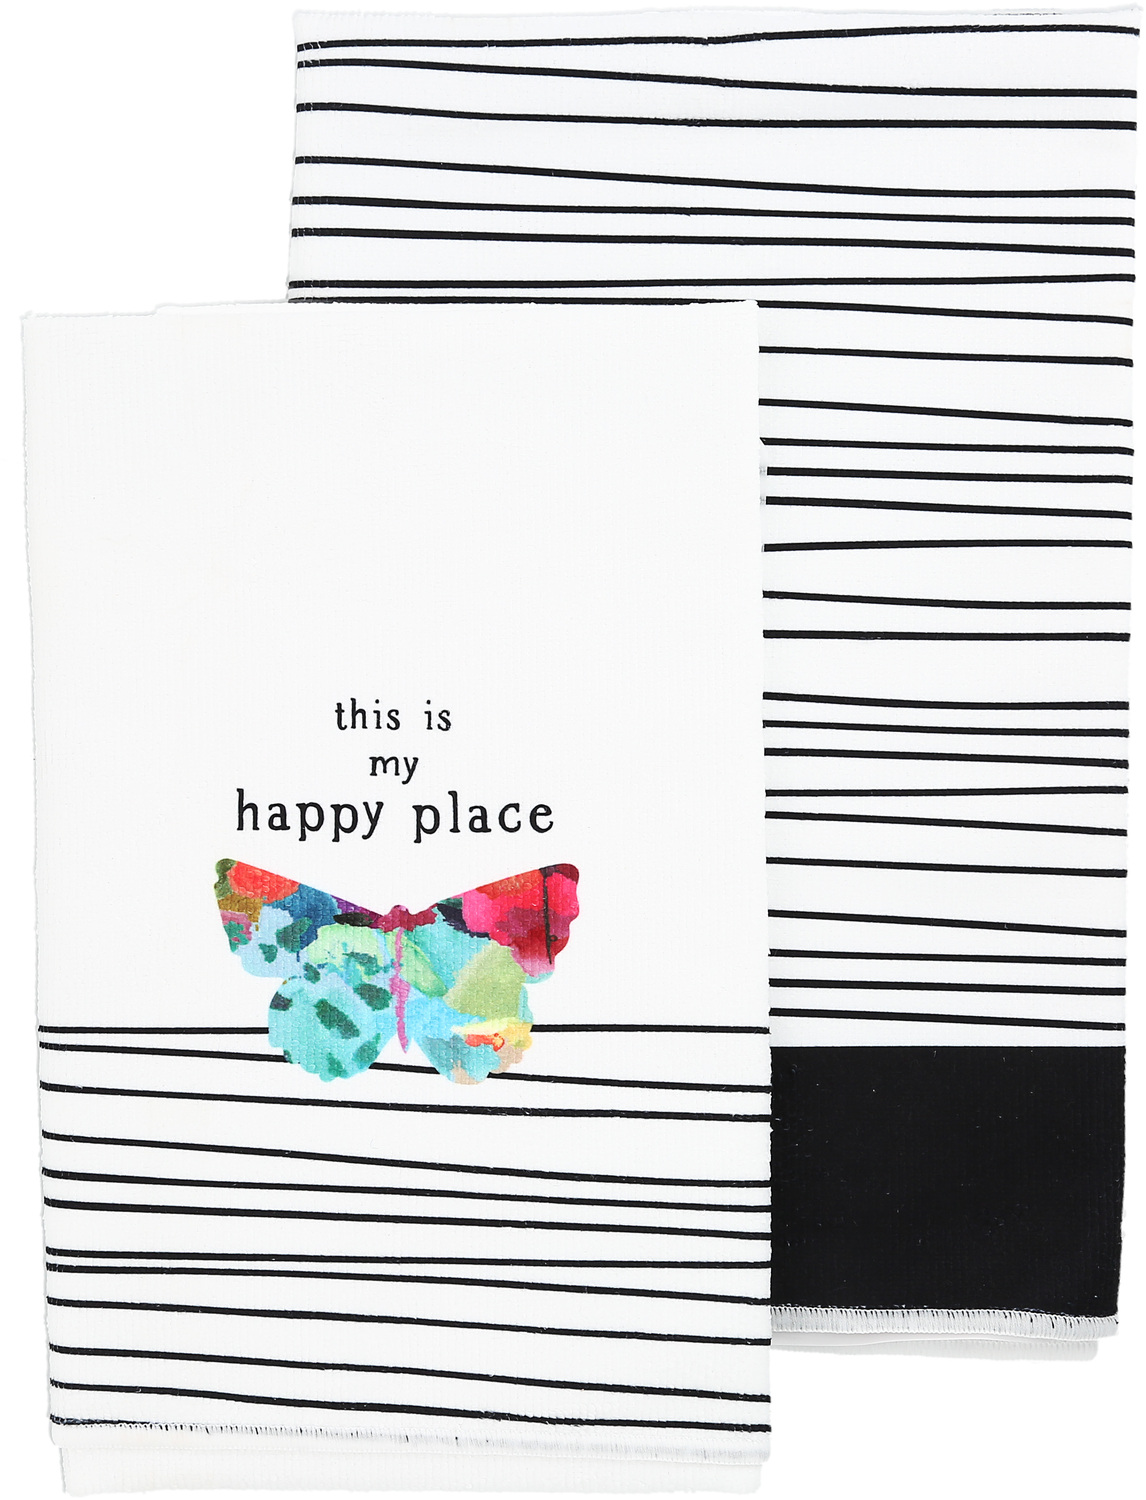 Happy Place by Celebrating You - Happy Place - Tea Towel Gift Set
(2 - 19.75" x 27.5")